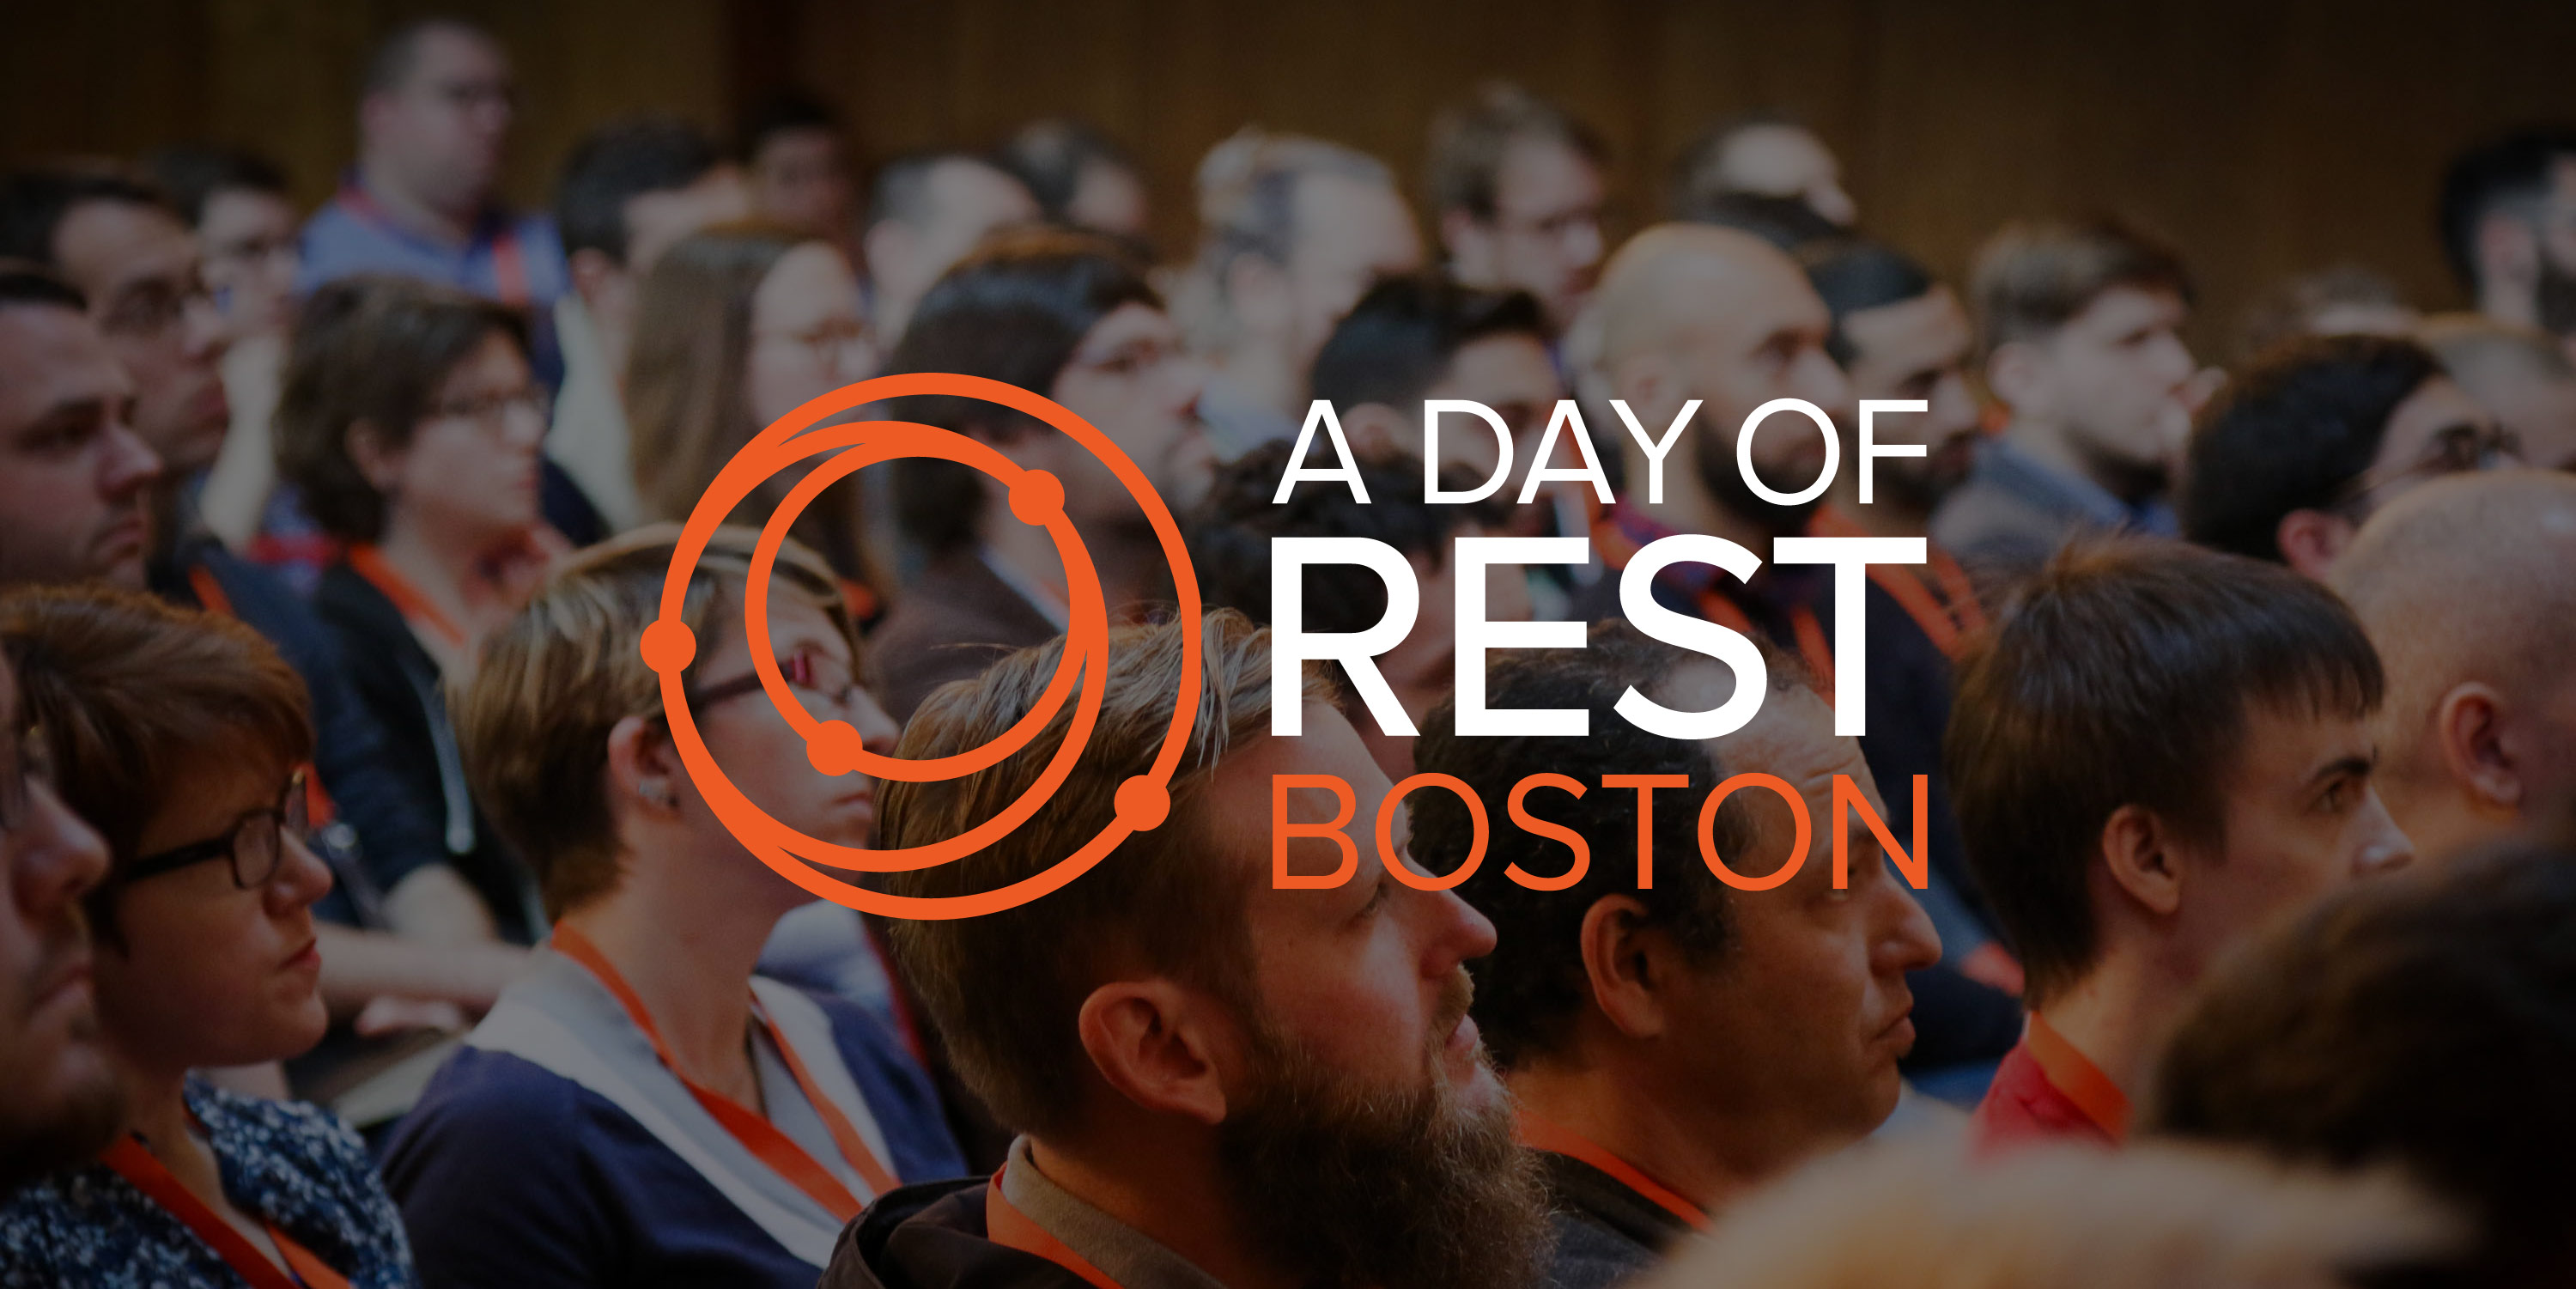 A Day of REST is going to Boston